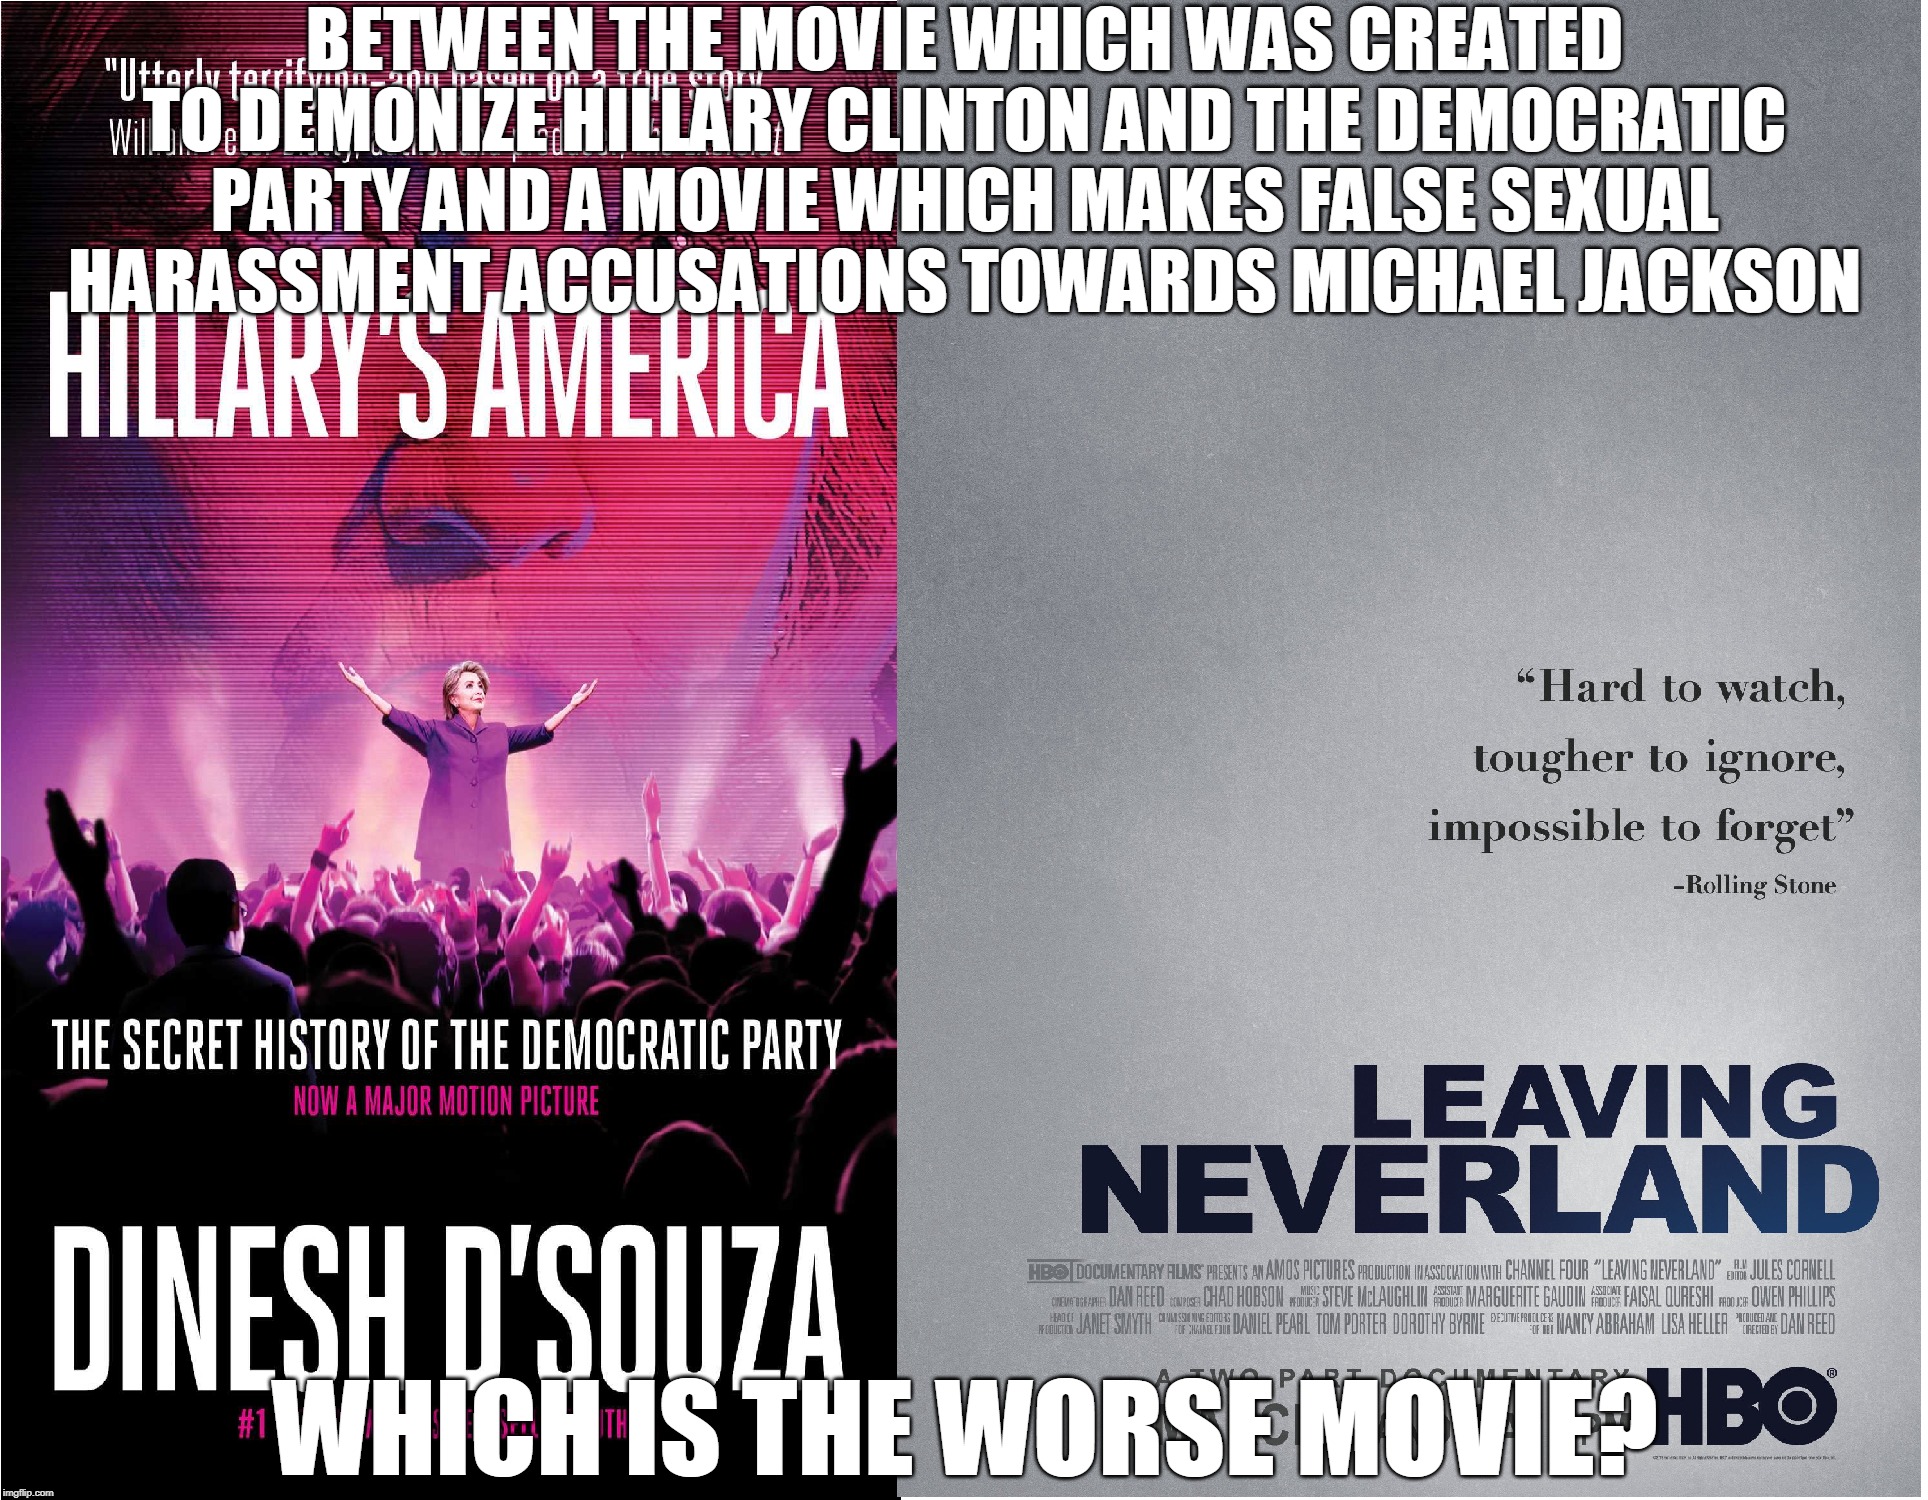 Hillary's America VS Leaving Neverland | BETWEEN THE MOVIE WHICH WAS CREATED TO DEMONIZE HILLARY CLINTON AND THE DEMOCRATIC PARTY AND A MOVIE WHICH MAKES FALSE SEXUAL HARASSMENT ACCUSATIONS TOWARDS MICHAEL JACKSON; WHICH IS THE WORSE MOVIE? | image tagged in memes,democratic party,hillary clinton,michael jackson | made w/ Imgflip meme maker